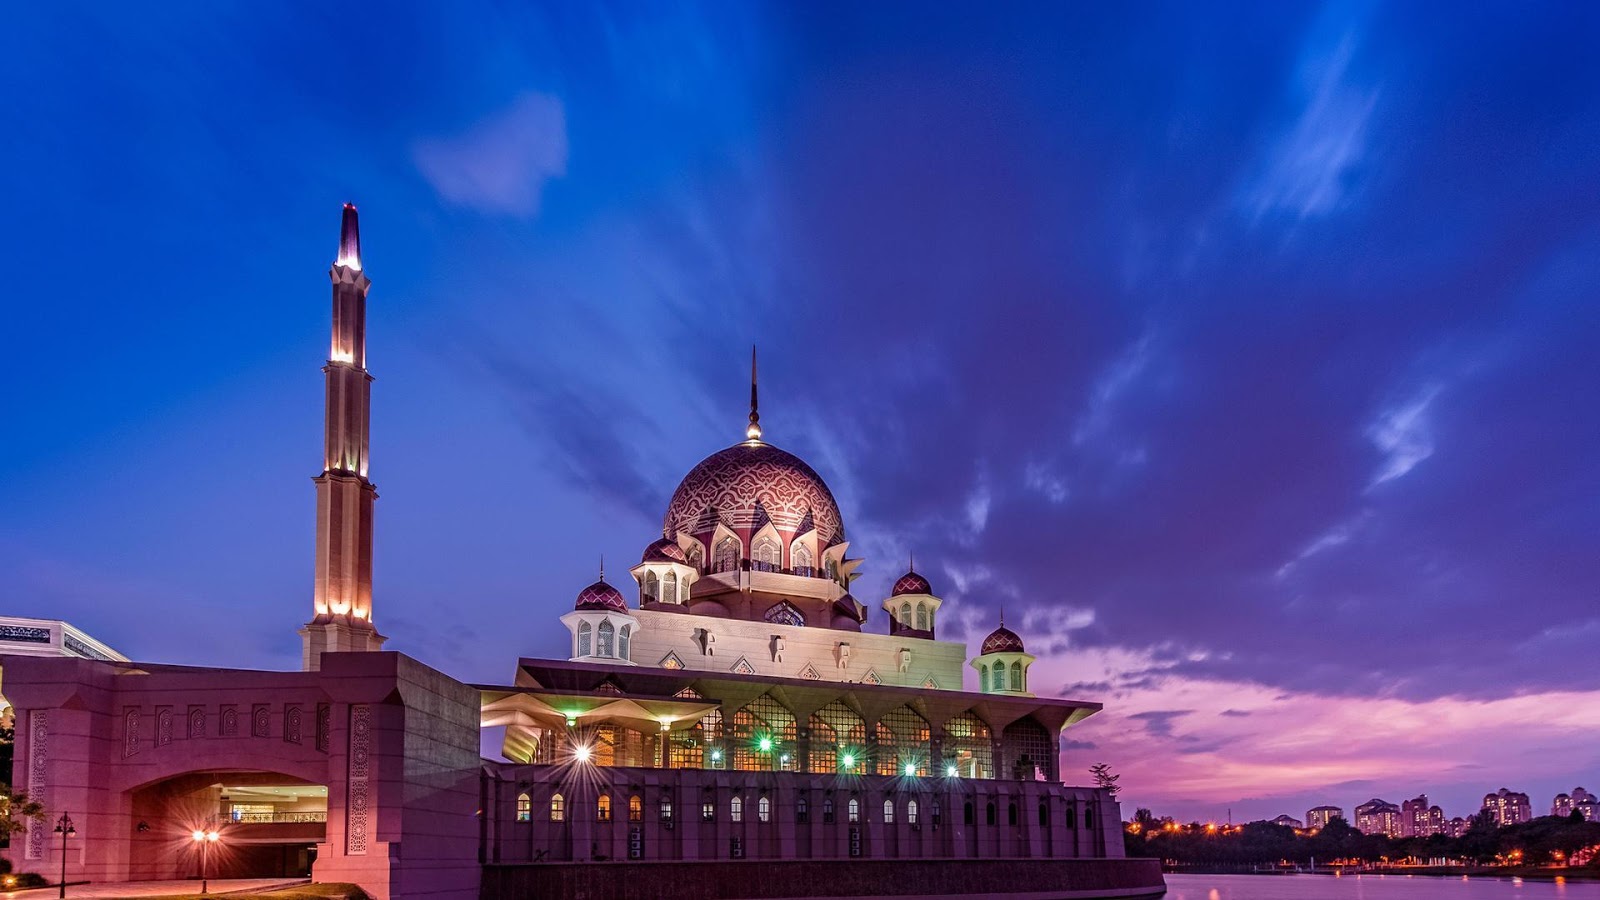 Islamic Mosque Wallpapers - Android Apps on Google Play